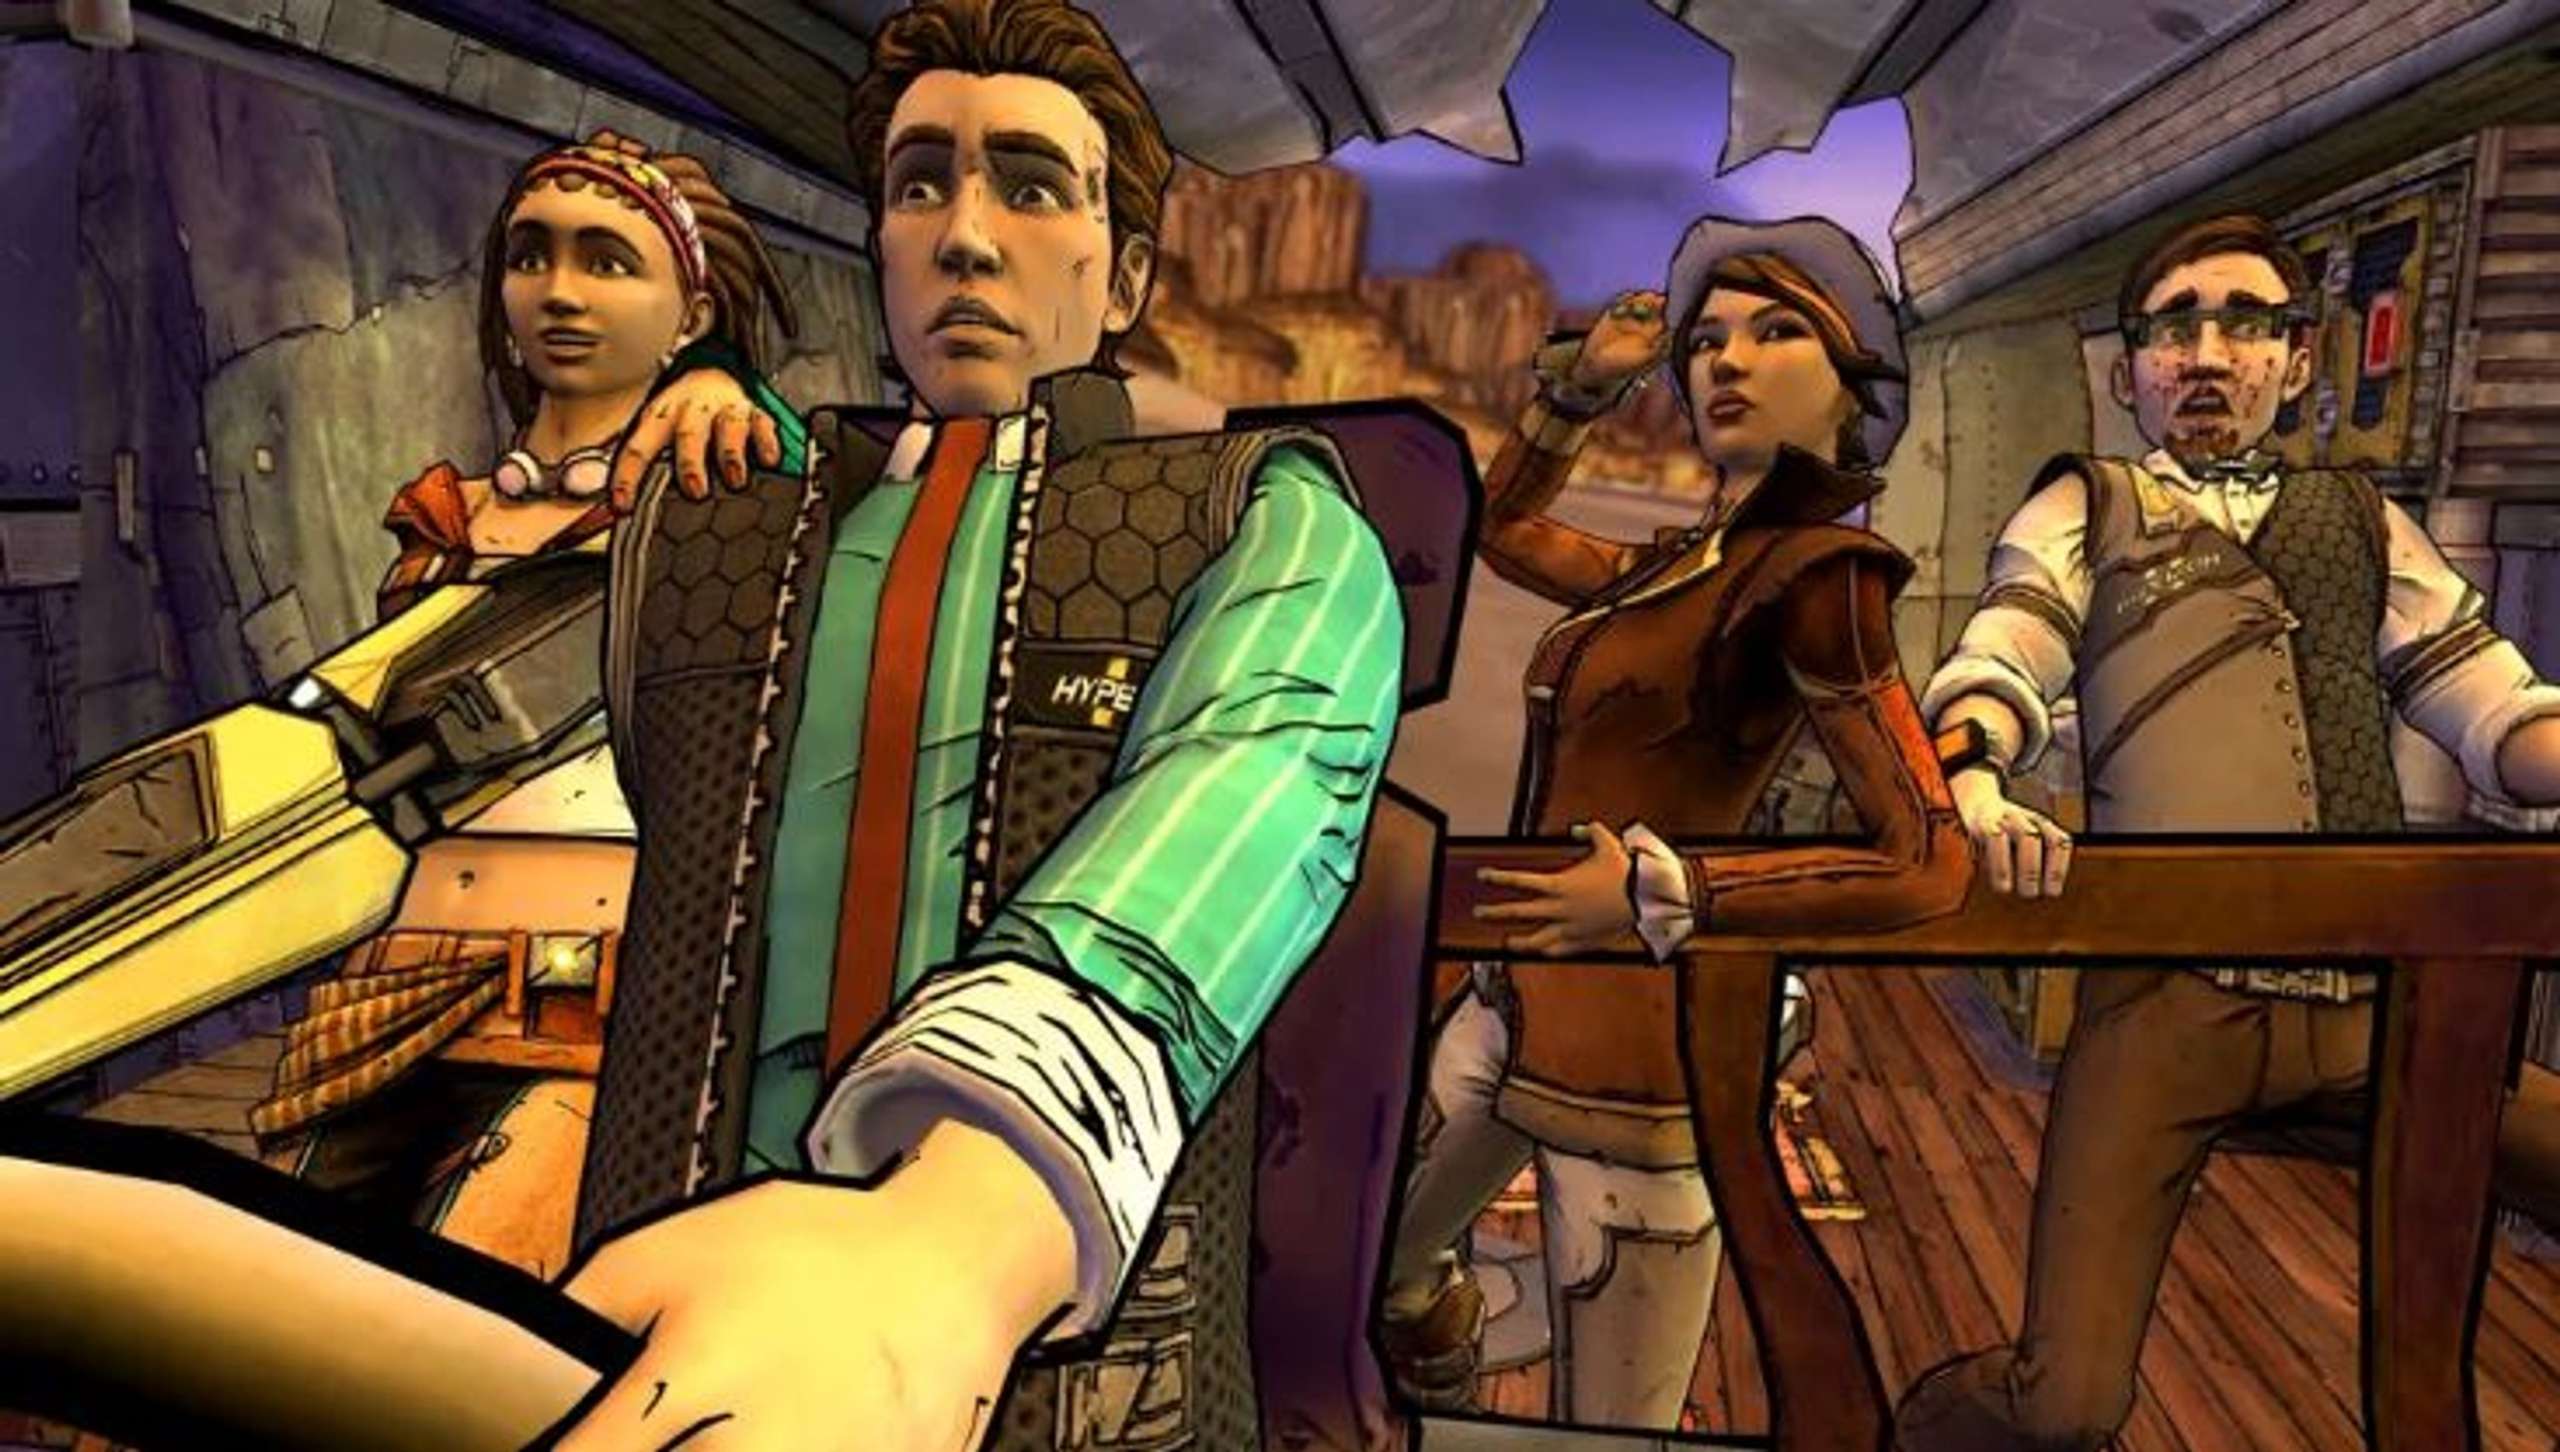 The Next Part Of The Tales From The Borderlands Adventure Received An “18+” Rating.